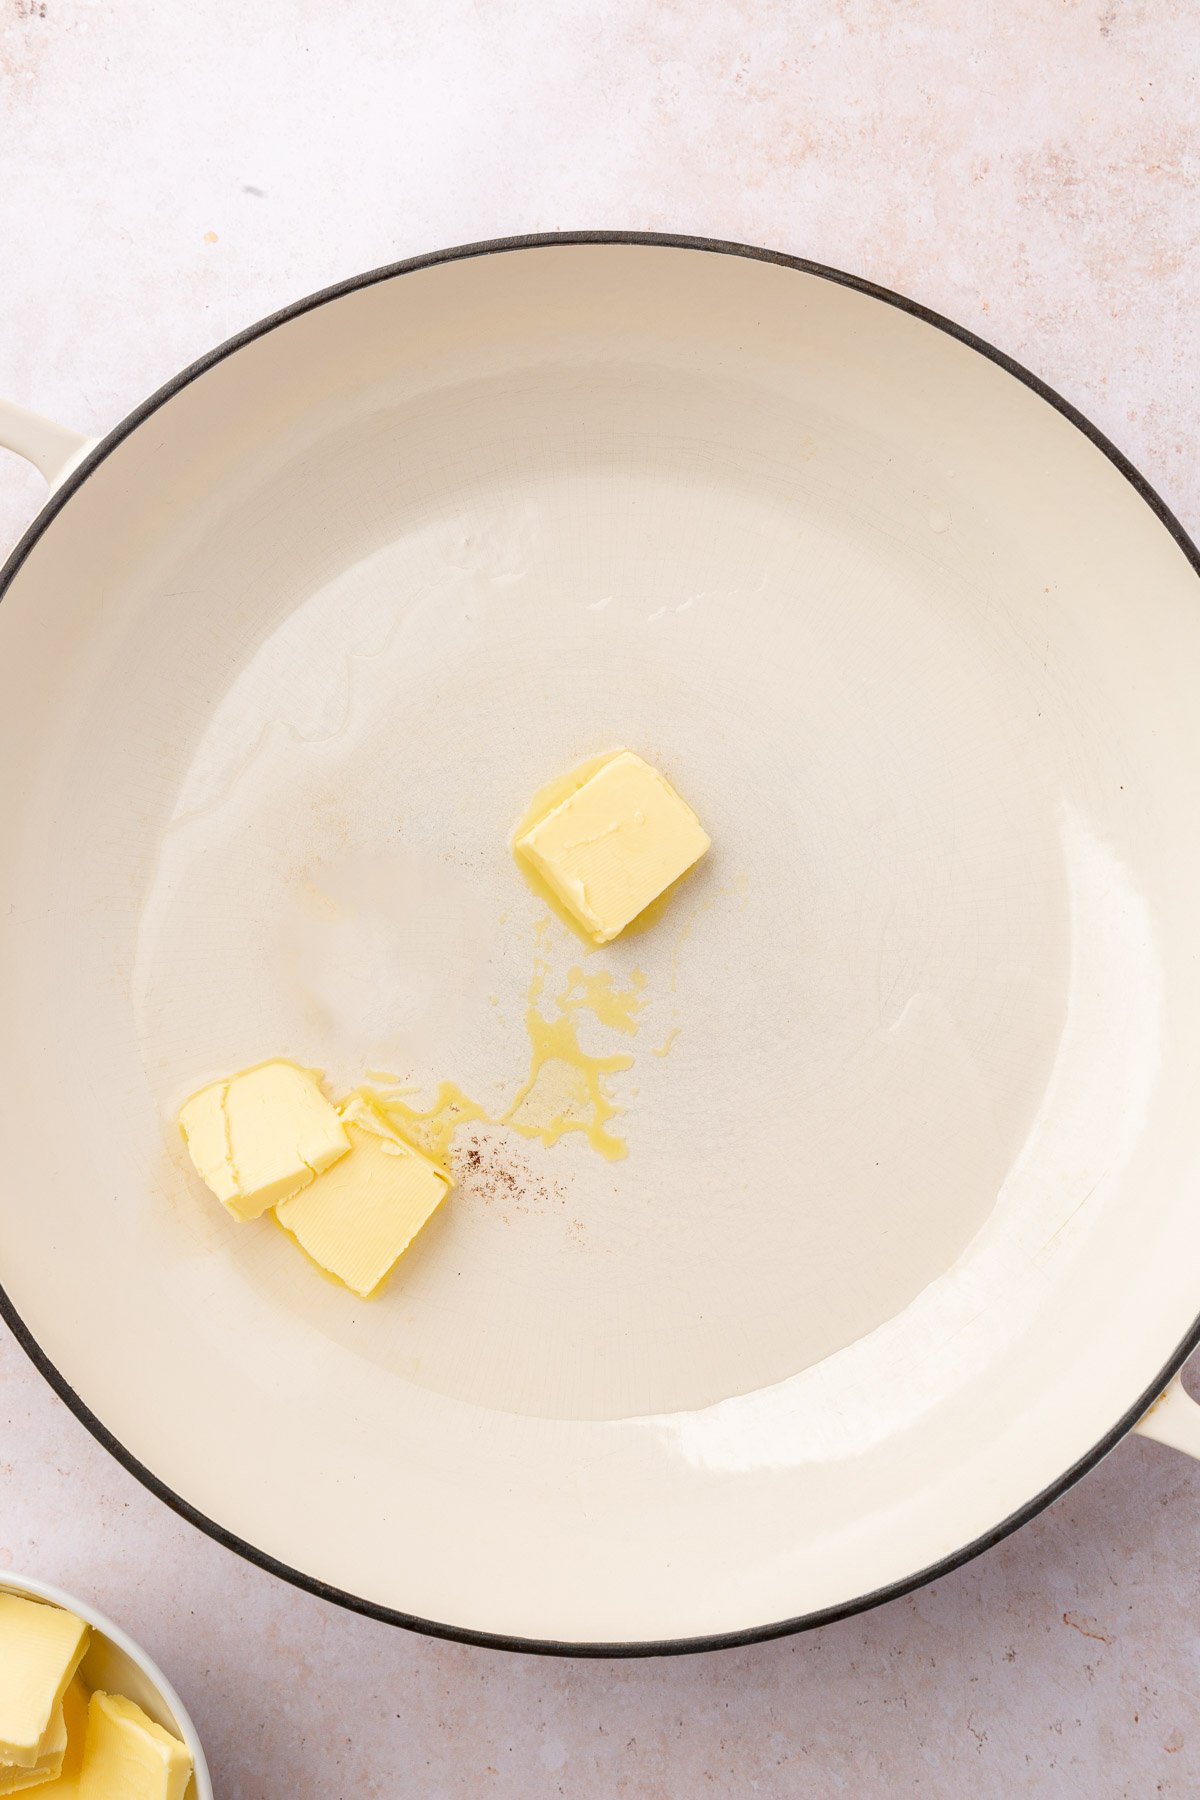 A braising pan with three tablespoons of butter in it that are starting to melt.